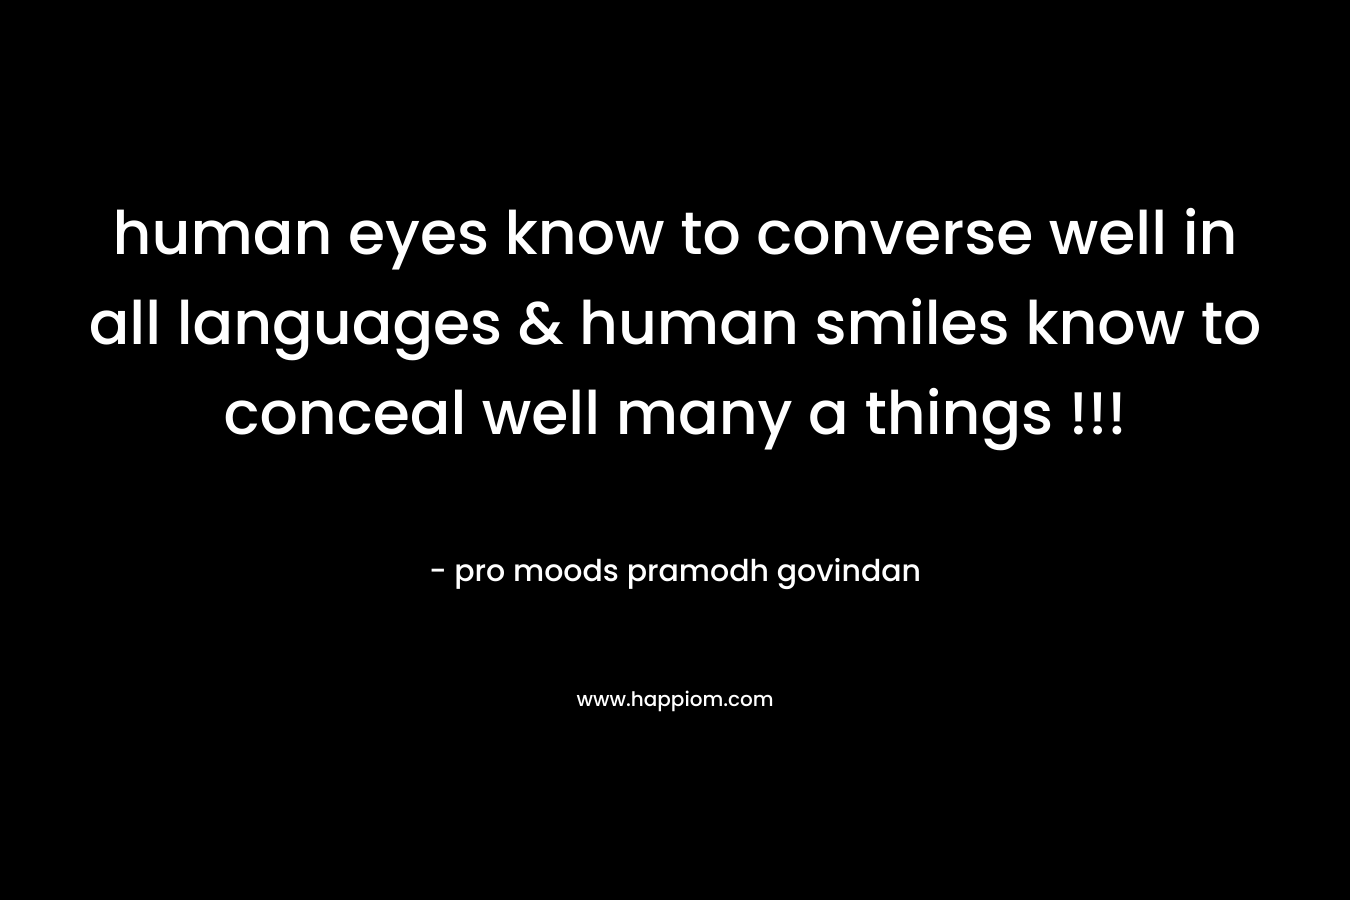 human eyes know to converse well in all languages & human smiles know to conceal well many a things !!! – pro moods pramodh govindan